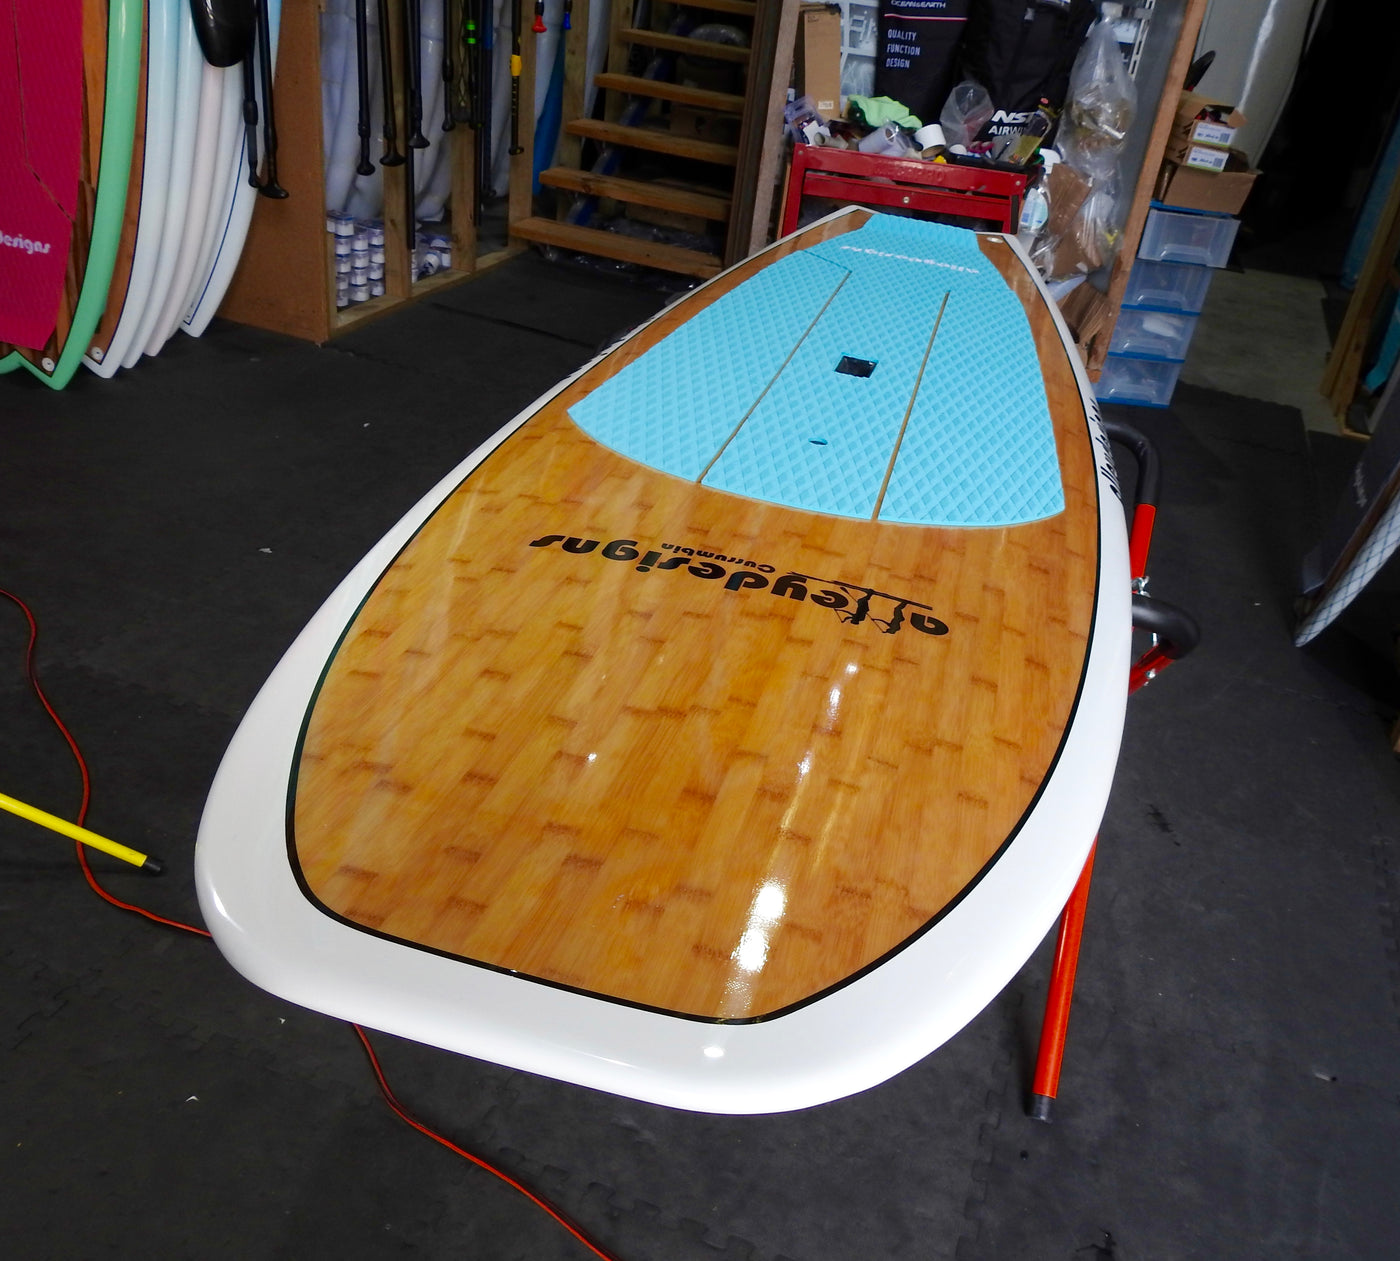 8’6” x 30” Galaxy Bounce Bamboo & White Surf SUP - Alleydesigns  Pty Ltd                                             ABN: 44165571264